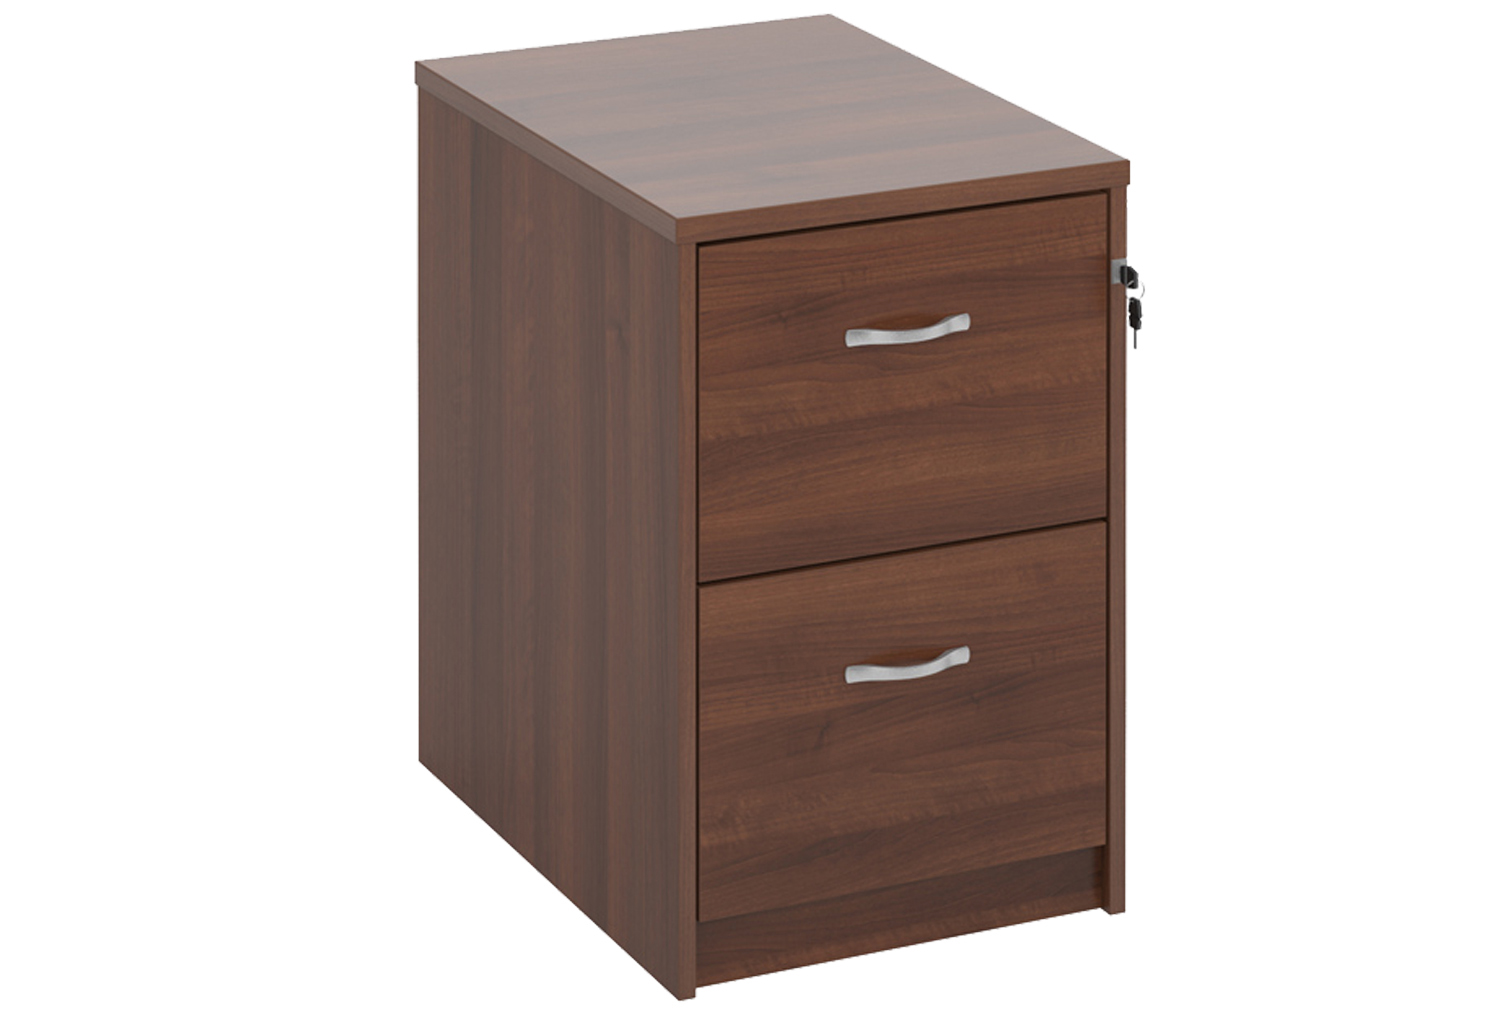 Tully Filing Cabinets, 2 Drawer - 48wx66dx73h (cm), Walnut, Express Delivery